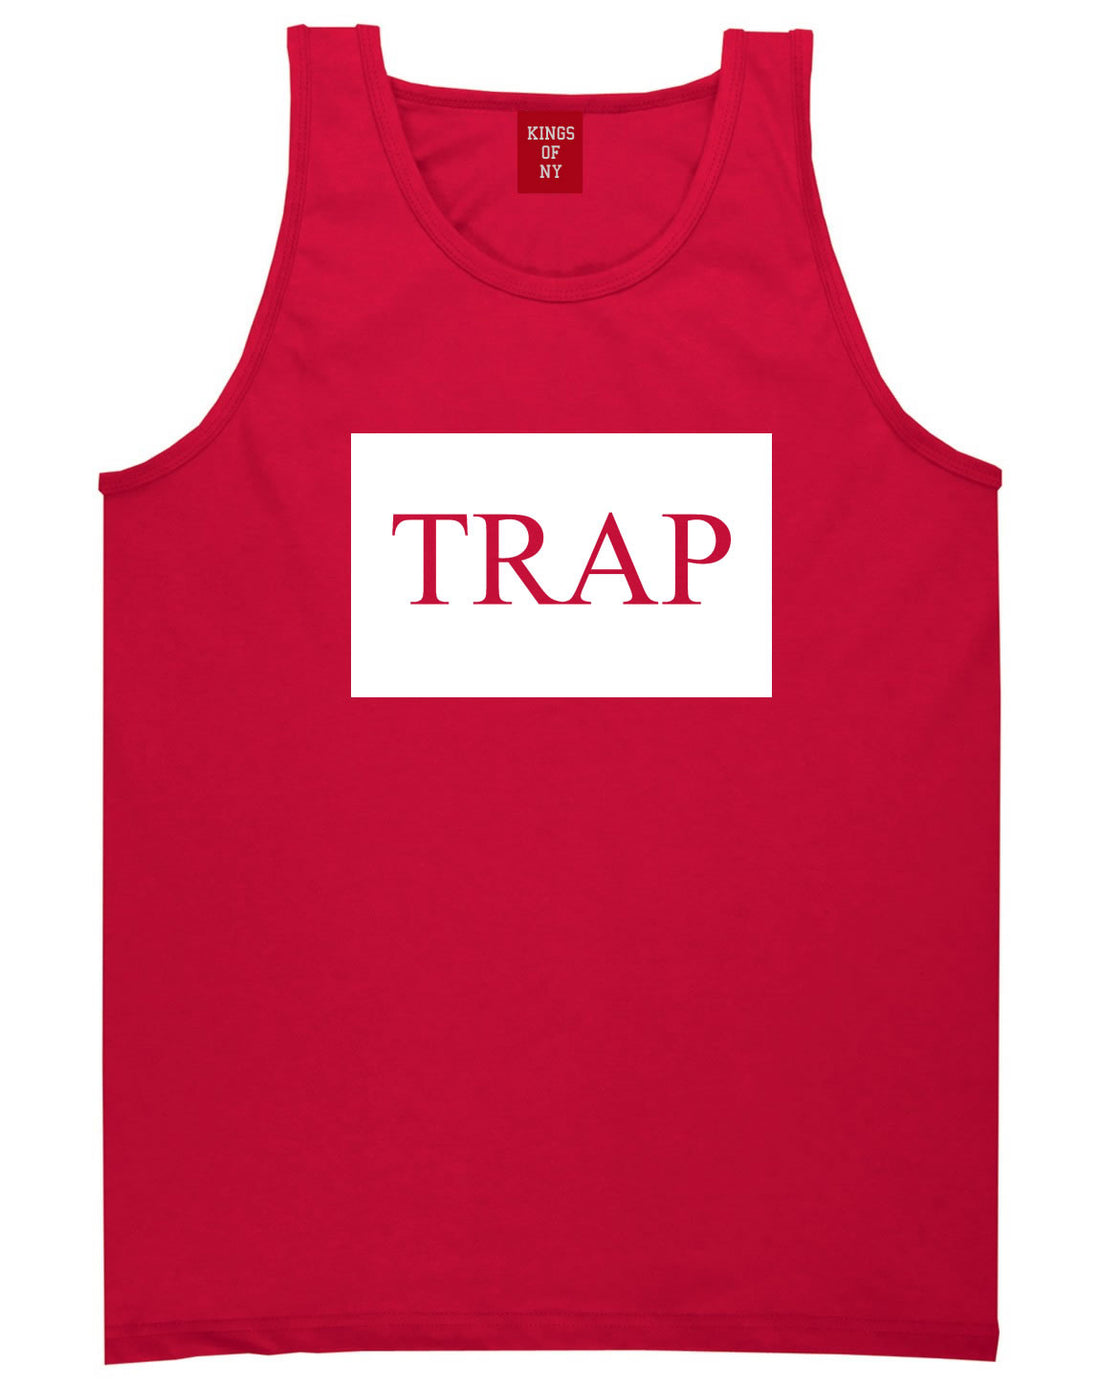 Trap Rectangle Logo Tank Top in Red By Kings Of NY